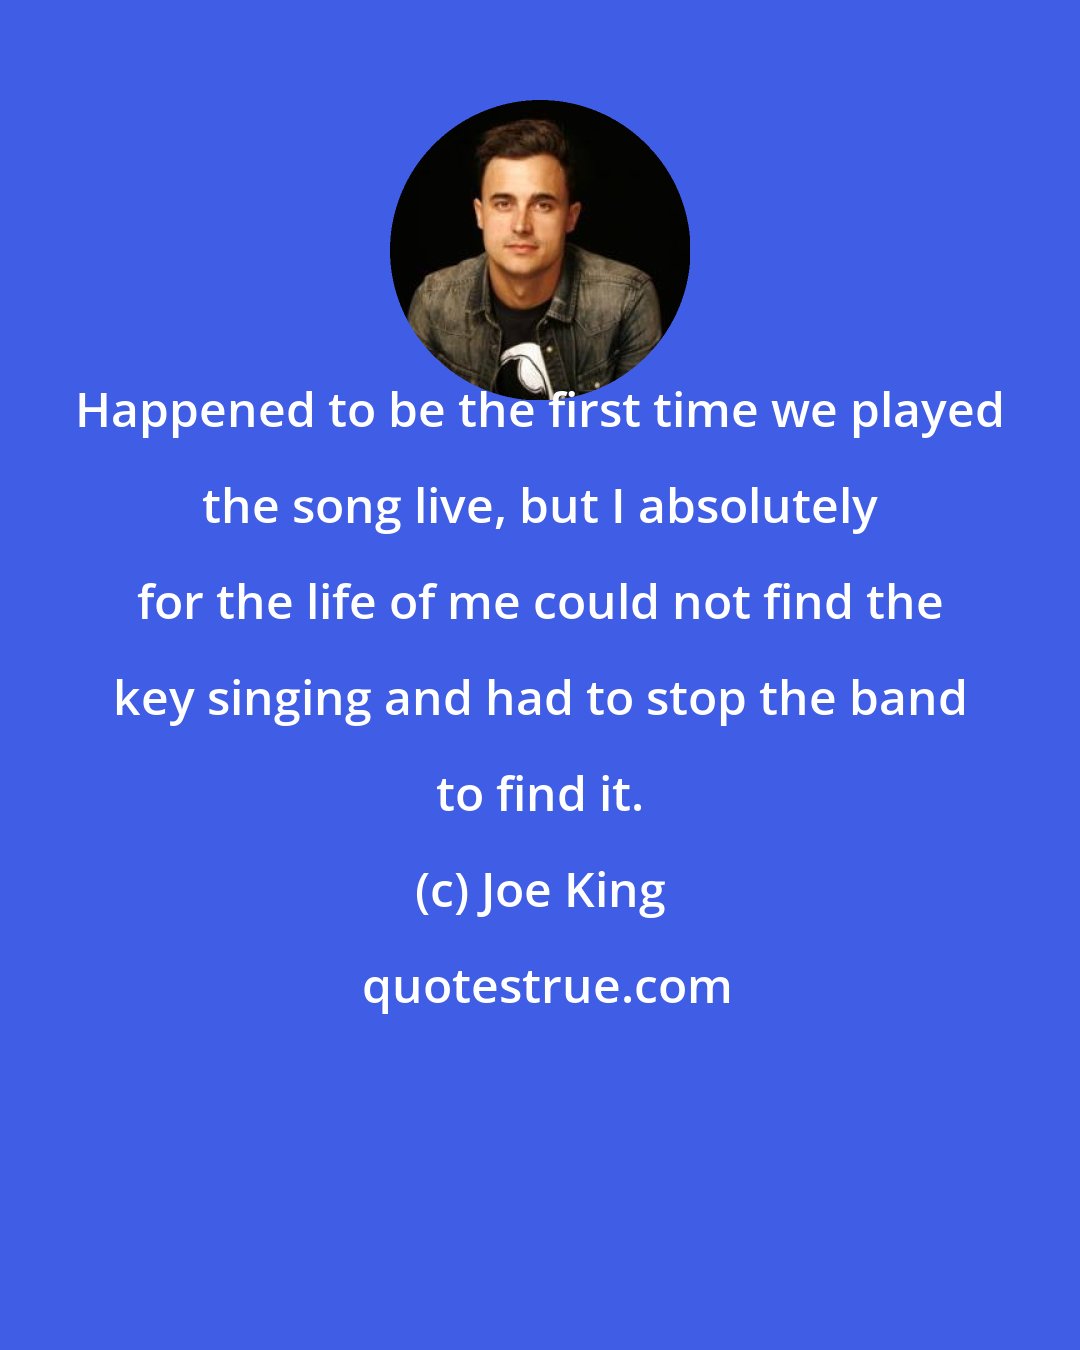 Joe King: Happened to be the first time we played the song live, but I absolutely for the life of me could not find the key singing and had to stop the band to find it.